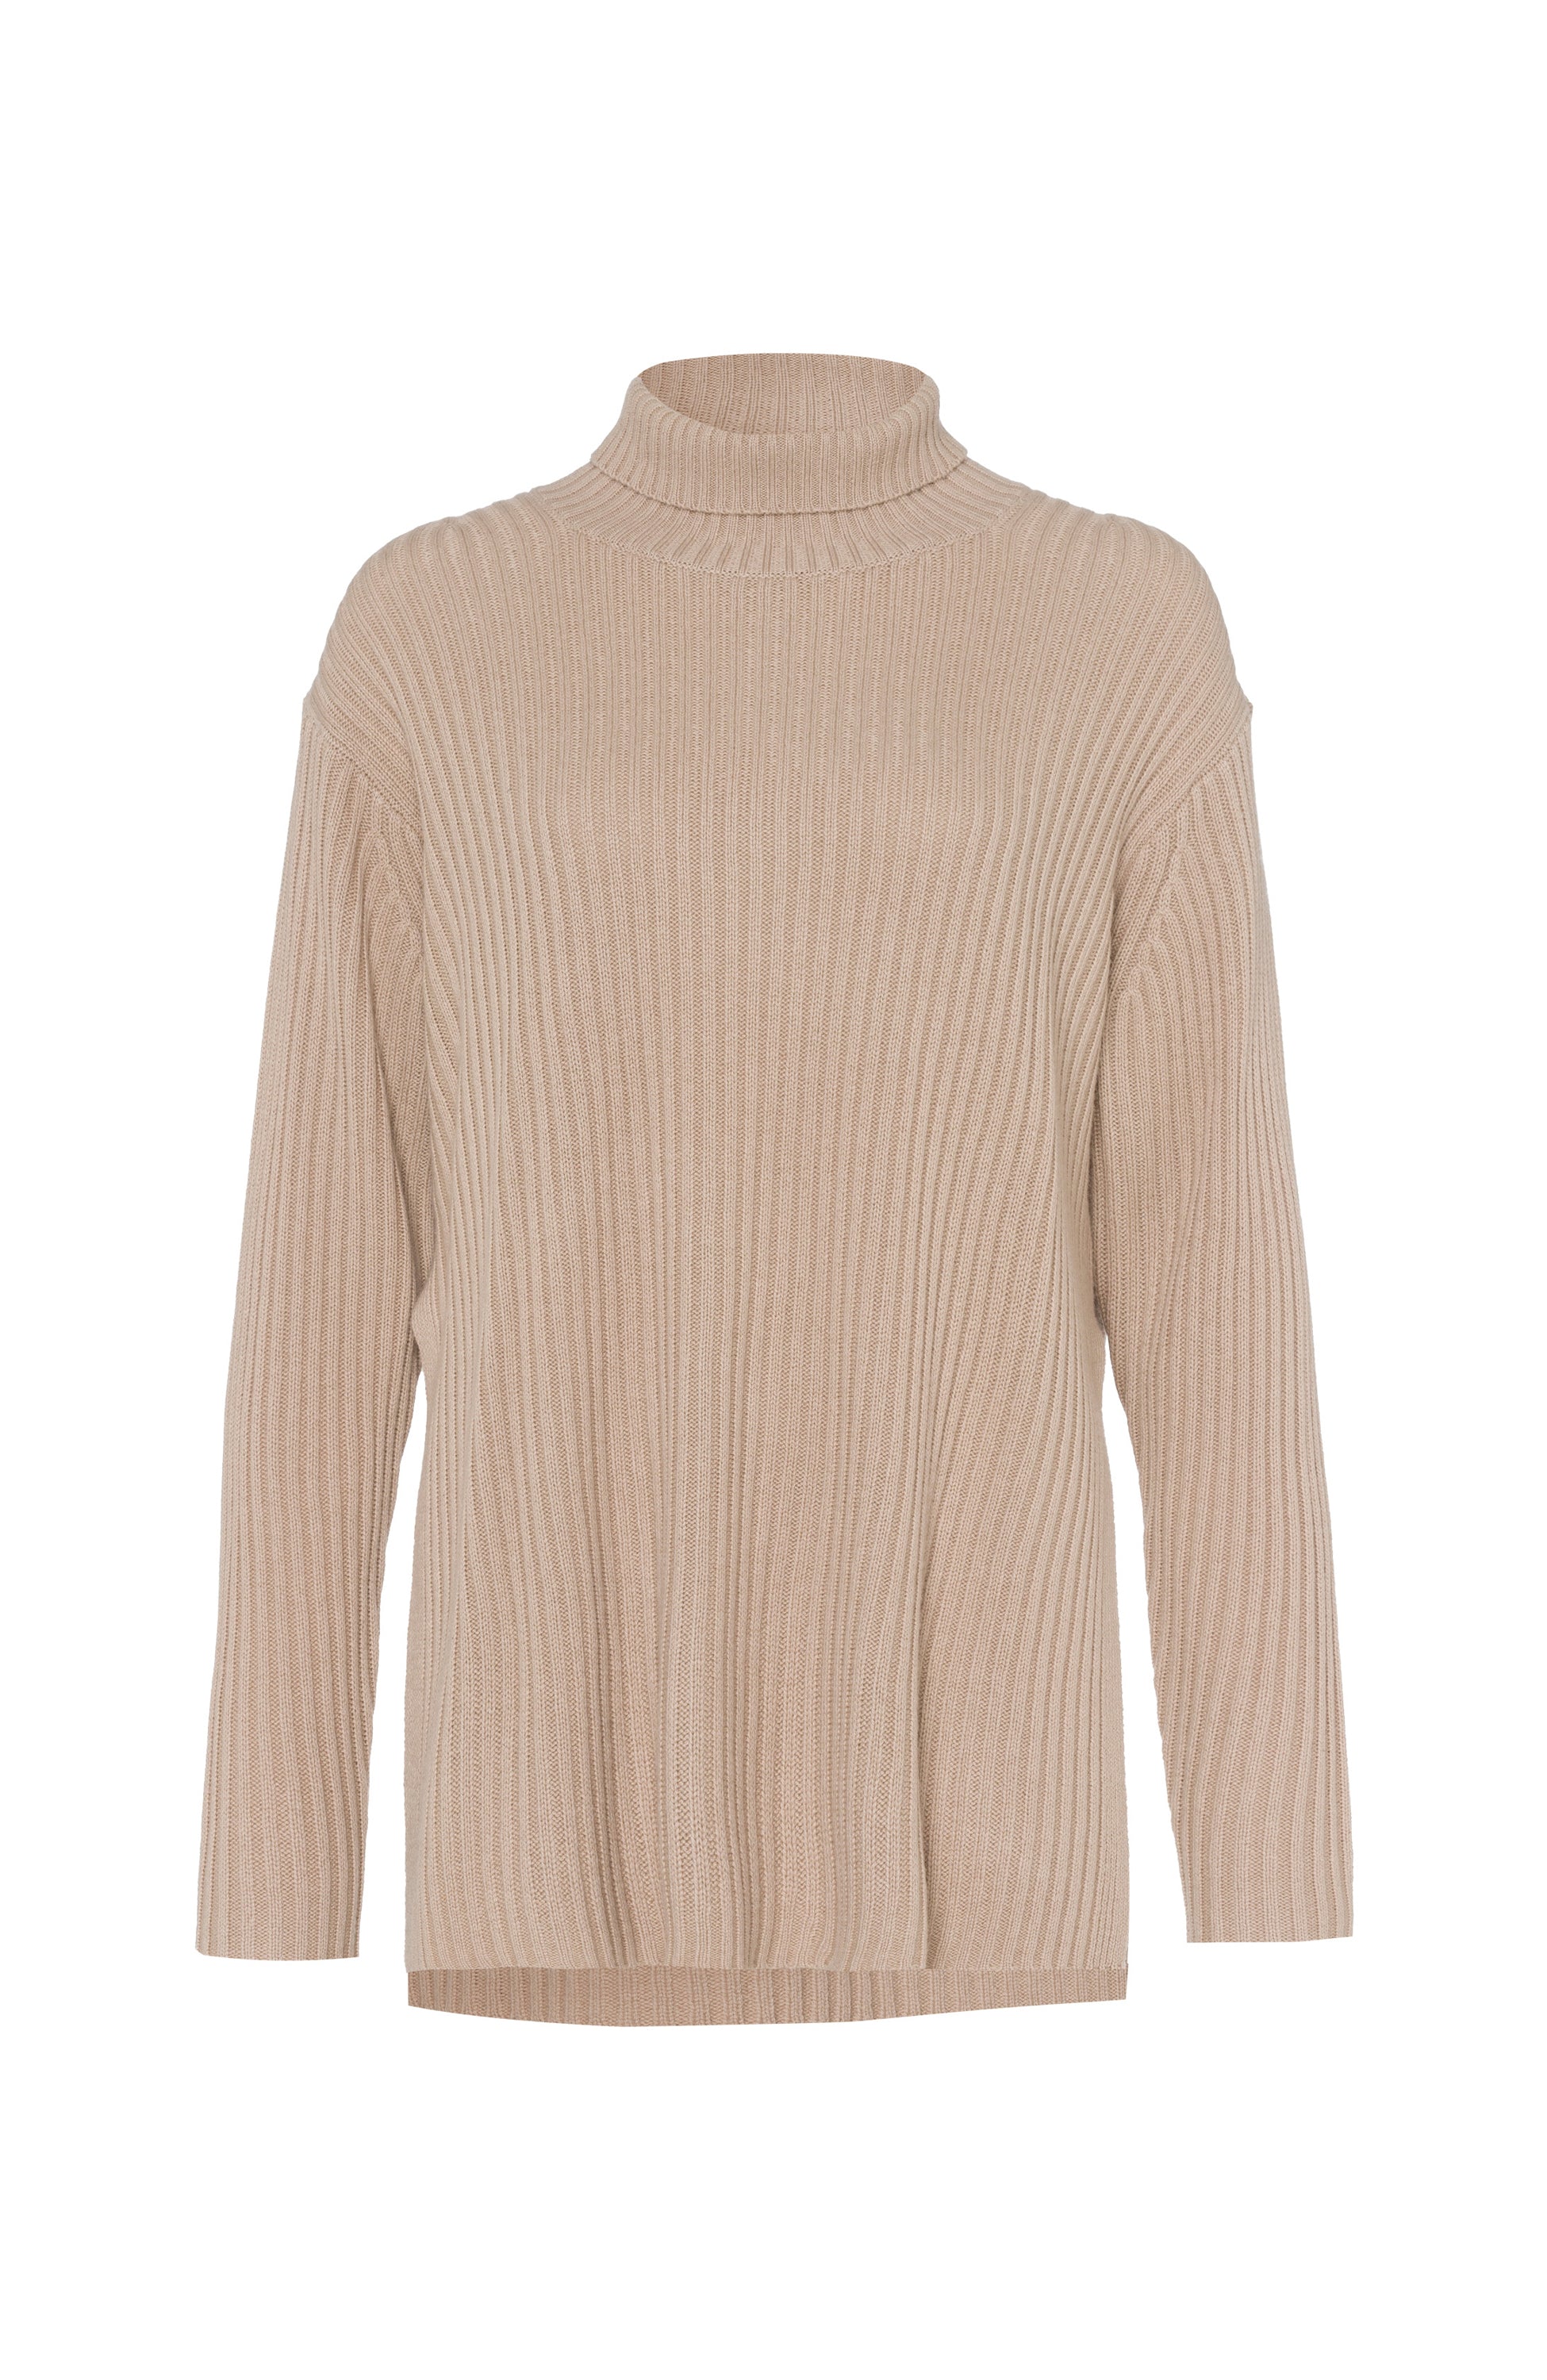 Cashmere Pullover FTC CASHMERE - Get Online!